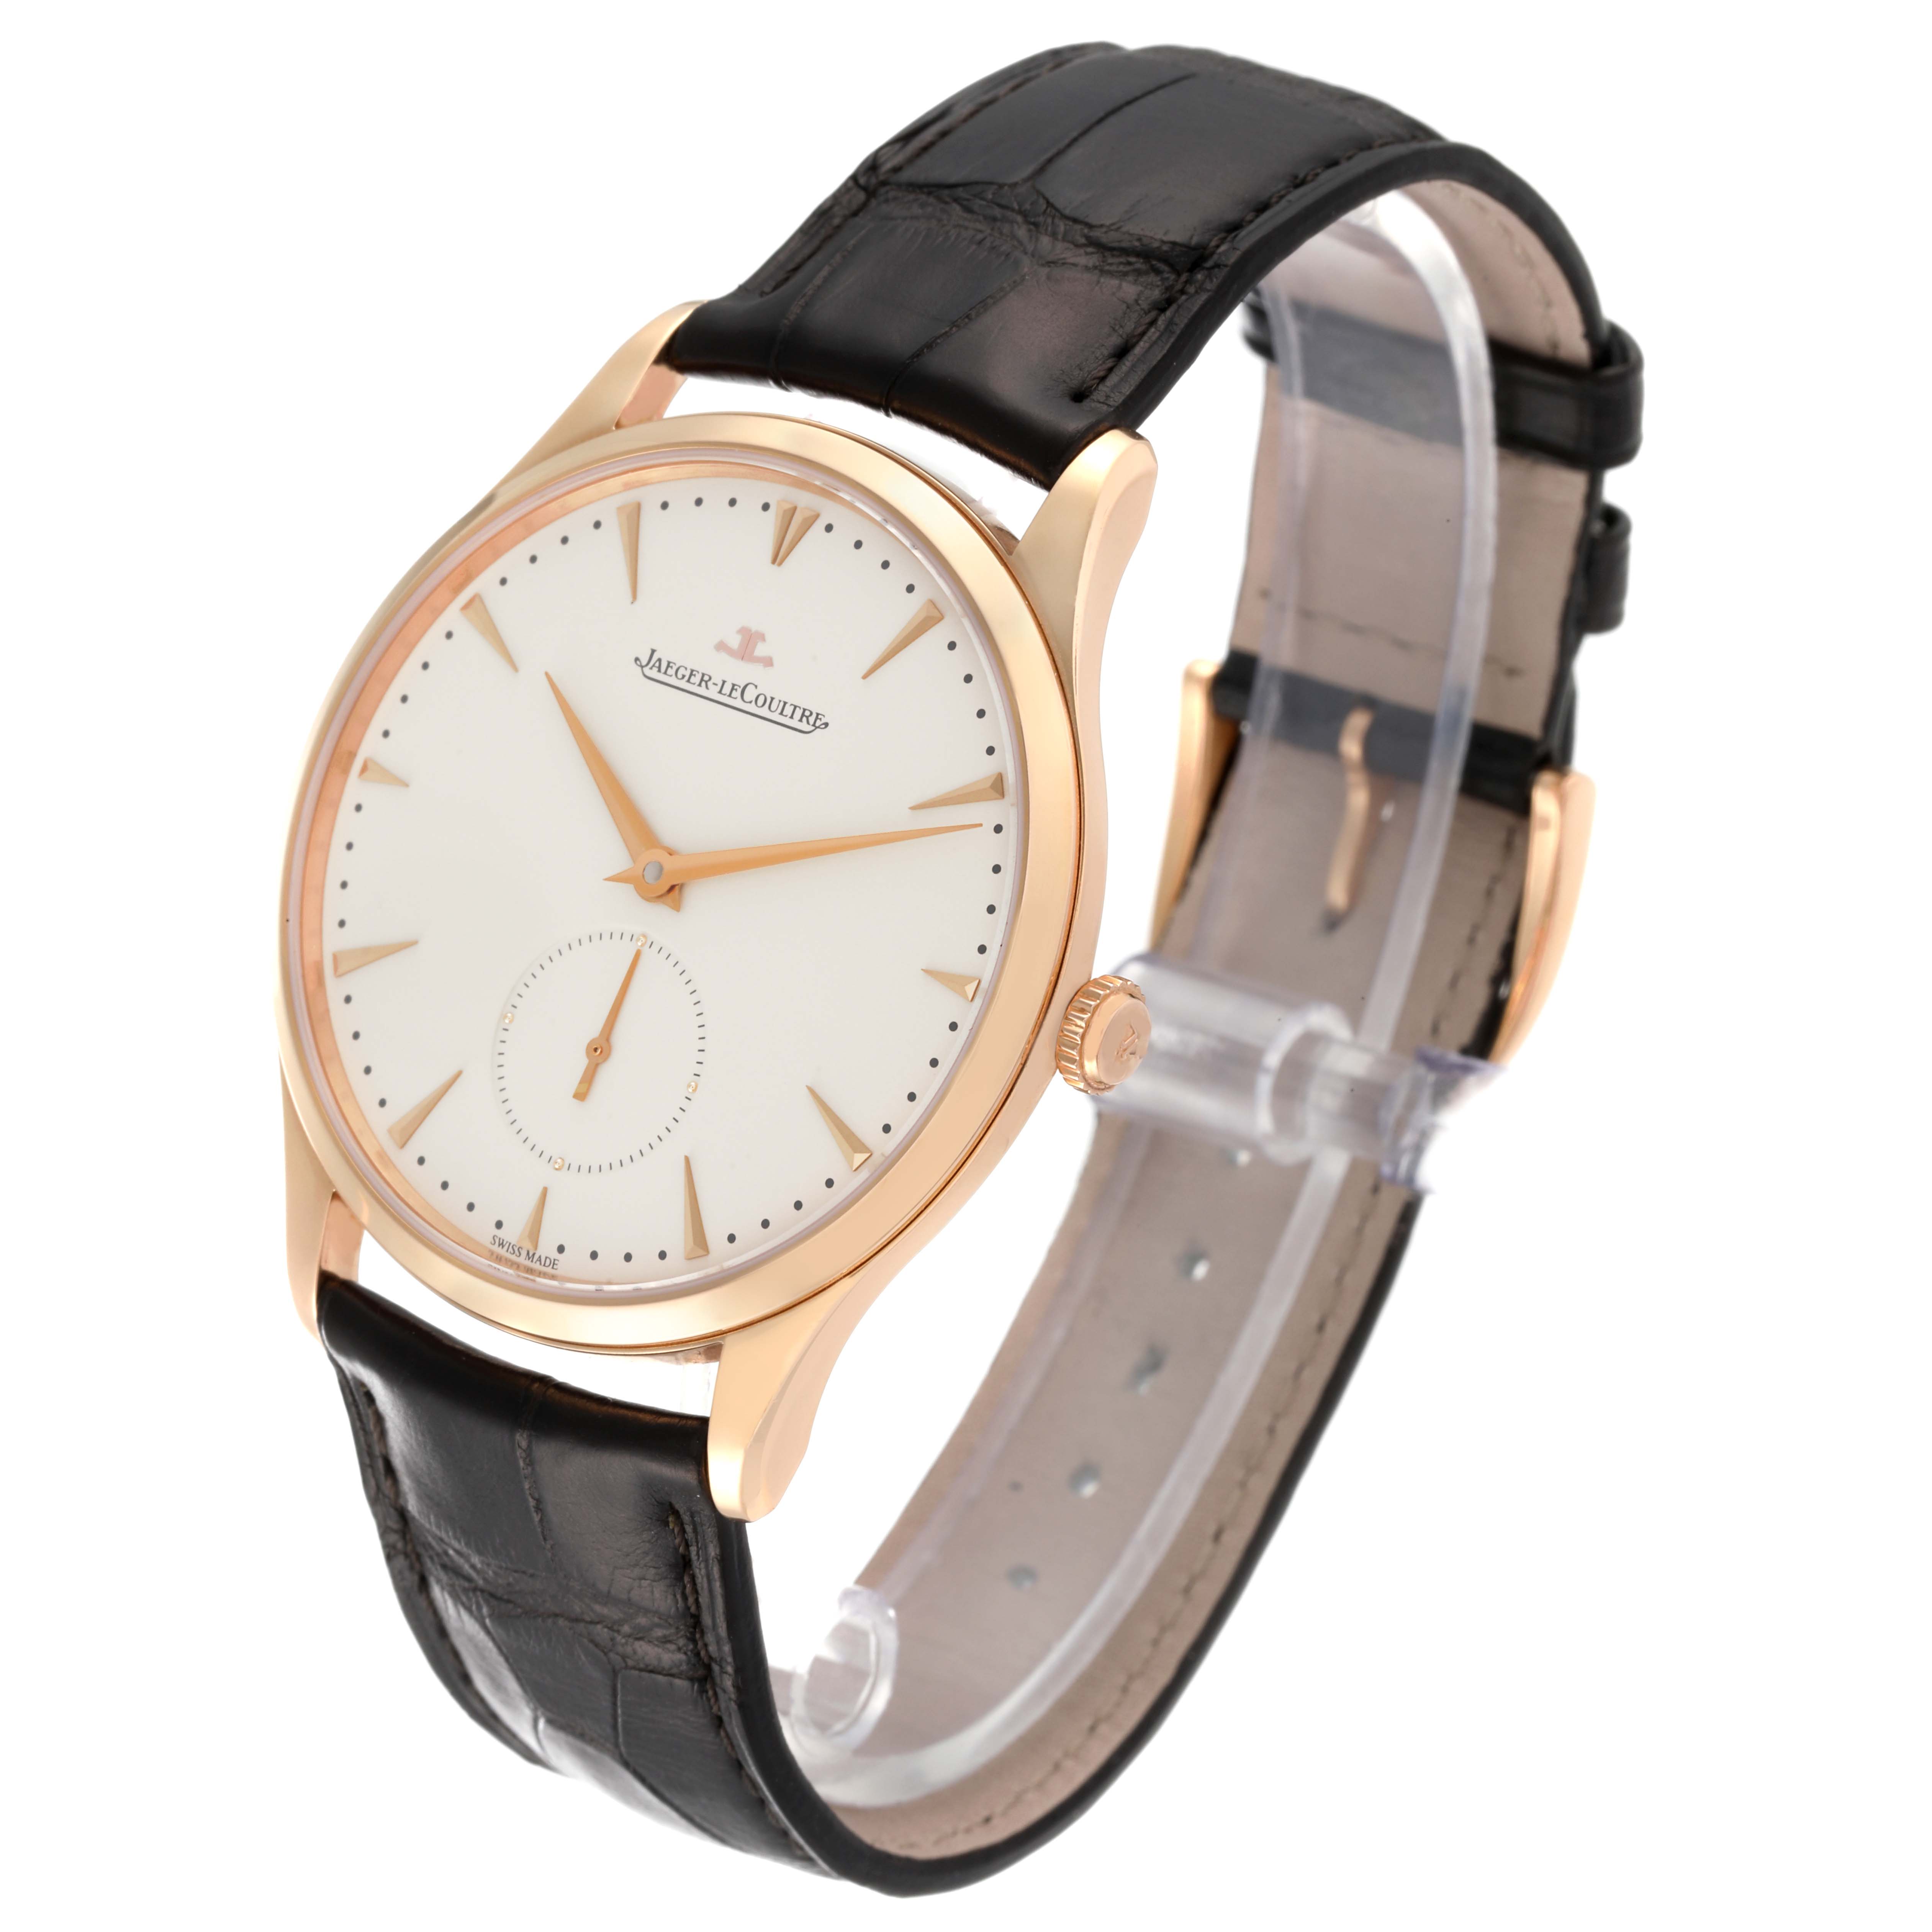 Jaeger LeCoultre Master Grande Ultra Thin Rose Gold Mens Watch Q1352520 ...